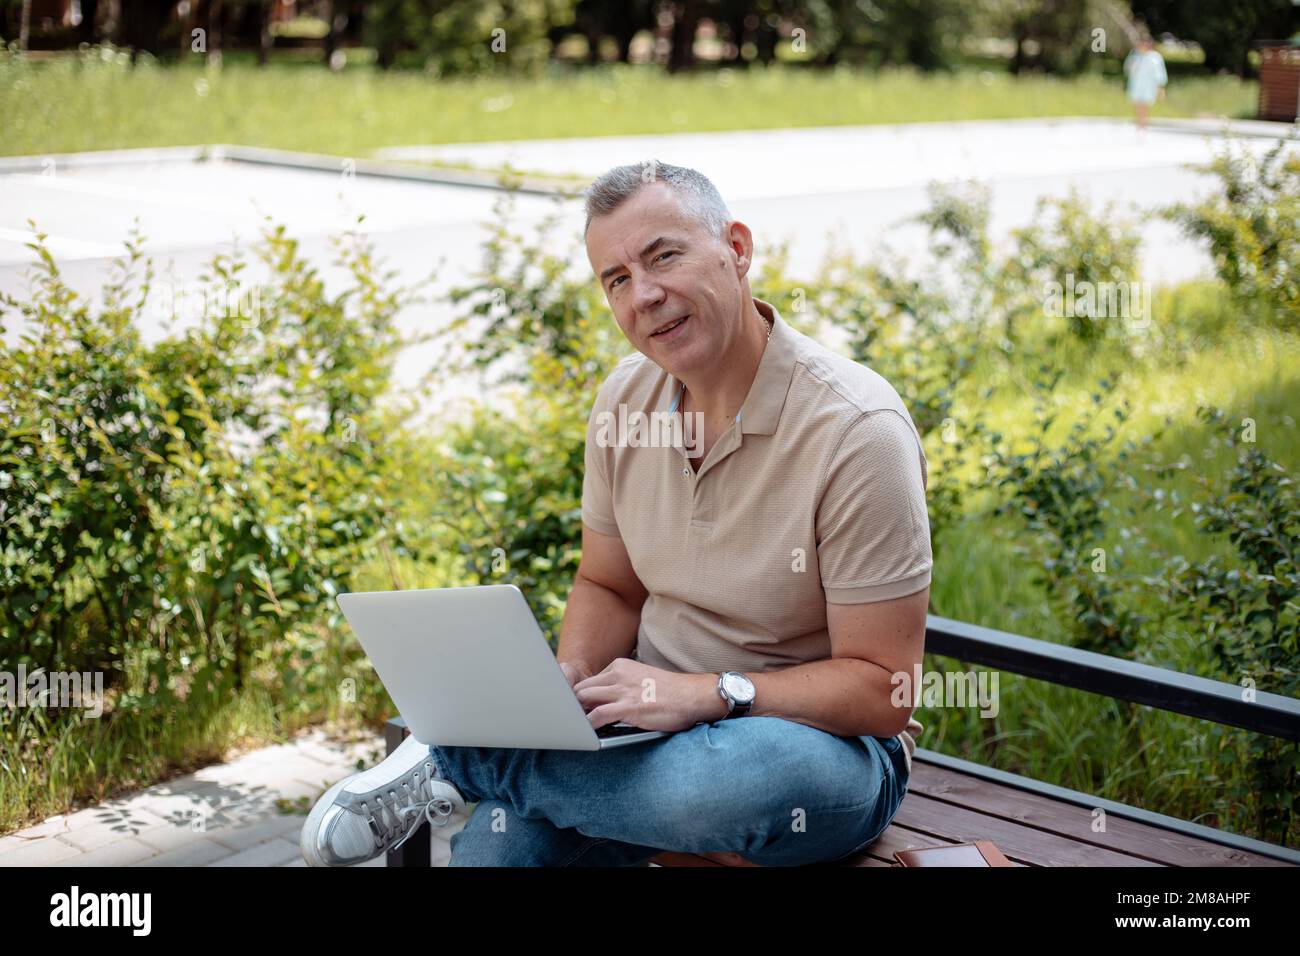 Expressive, charismatic senior gray haired businessman using laptop, wireless modern technology sitting on bench in park Stock Photo